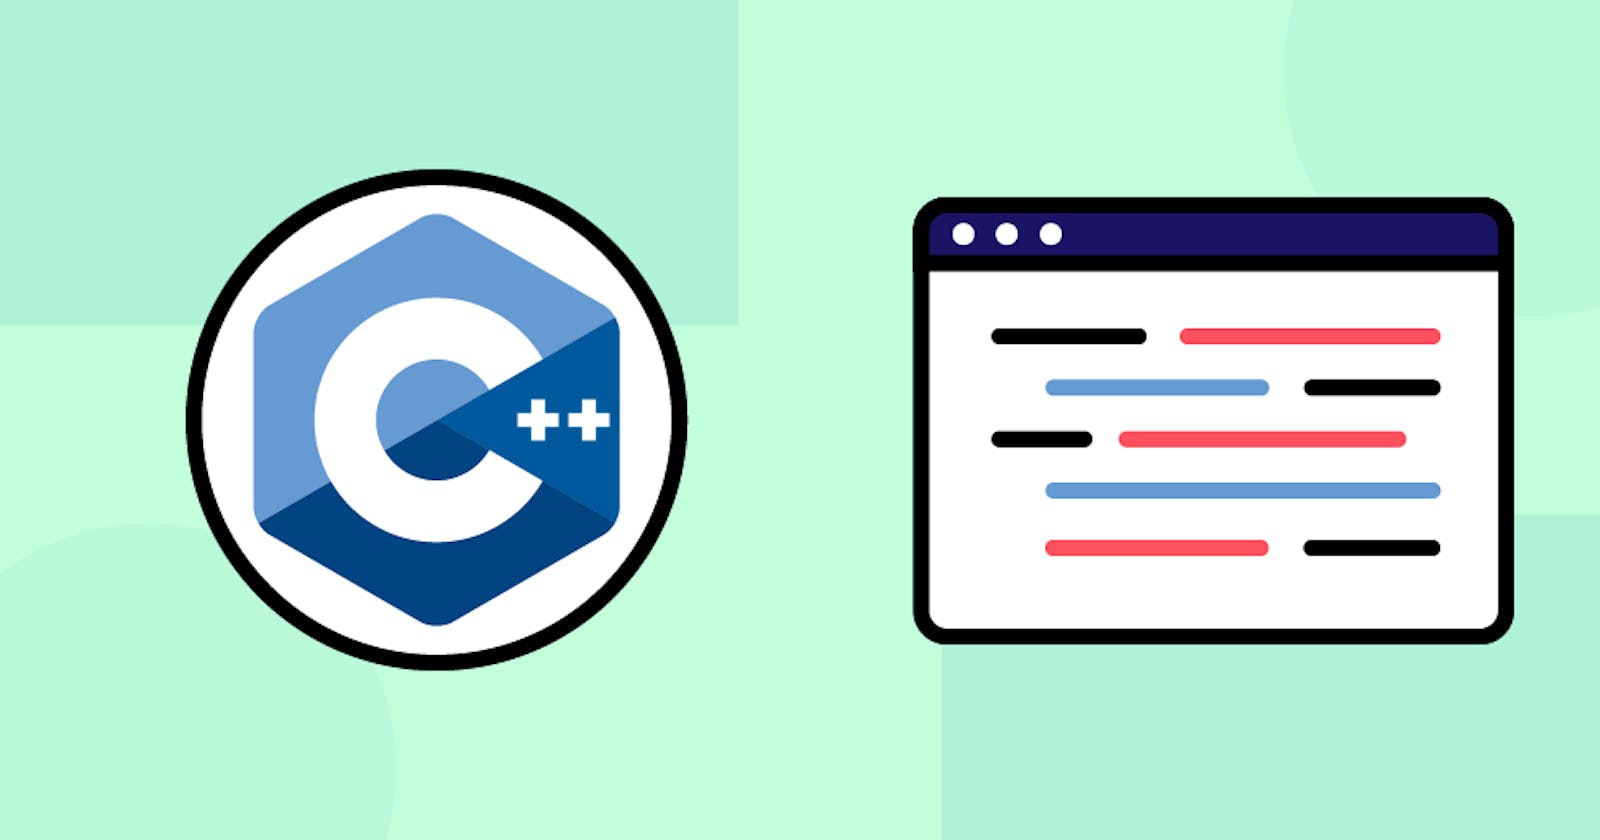 The 11 best C++ IDEs (and code editors) for 2022